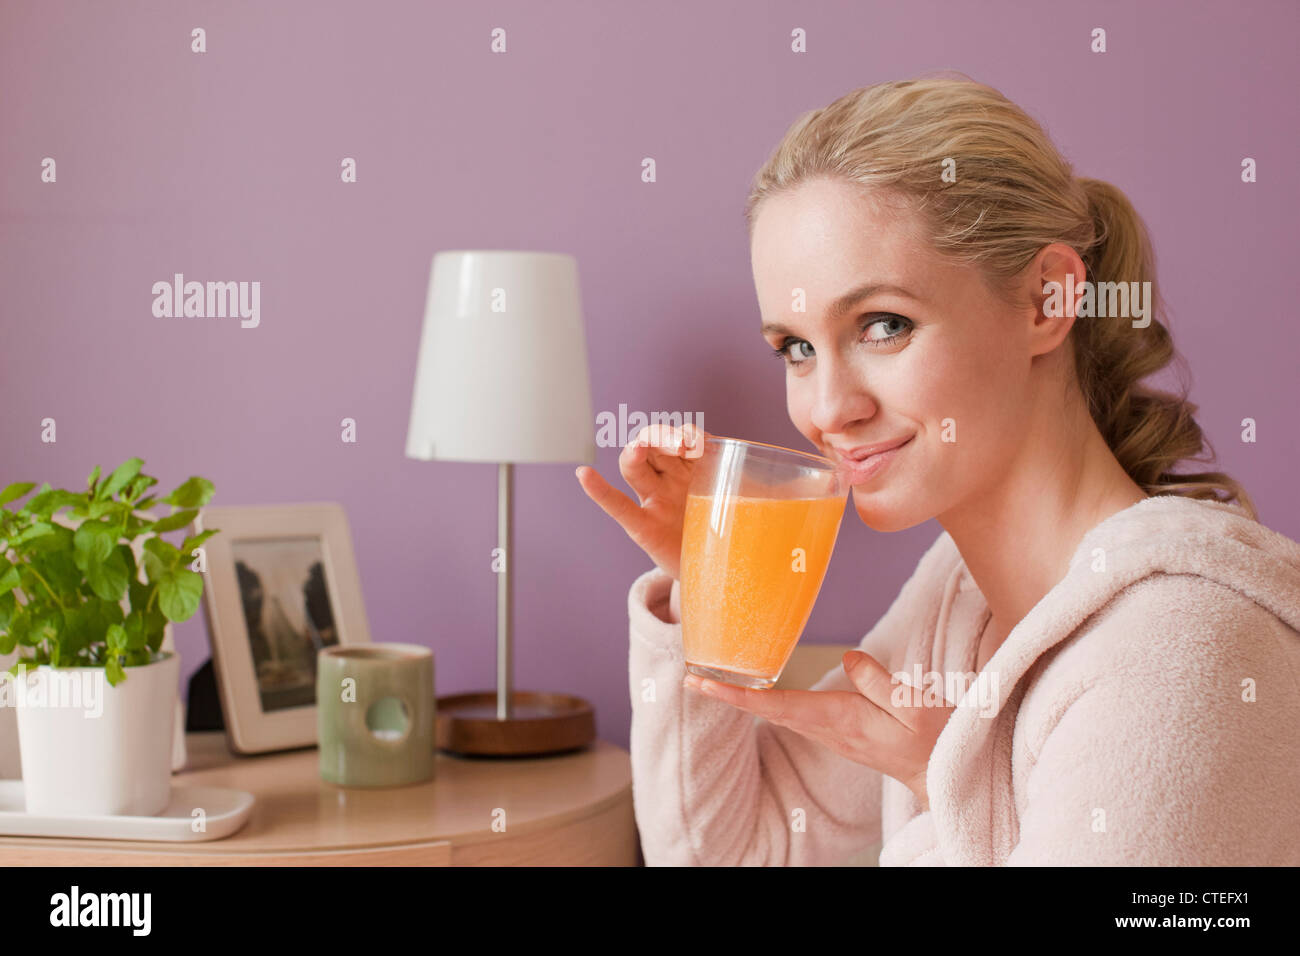 Woman with vitamin drink Stock Photo